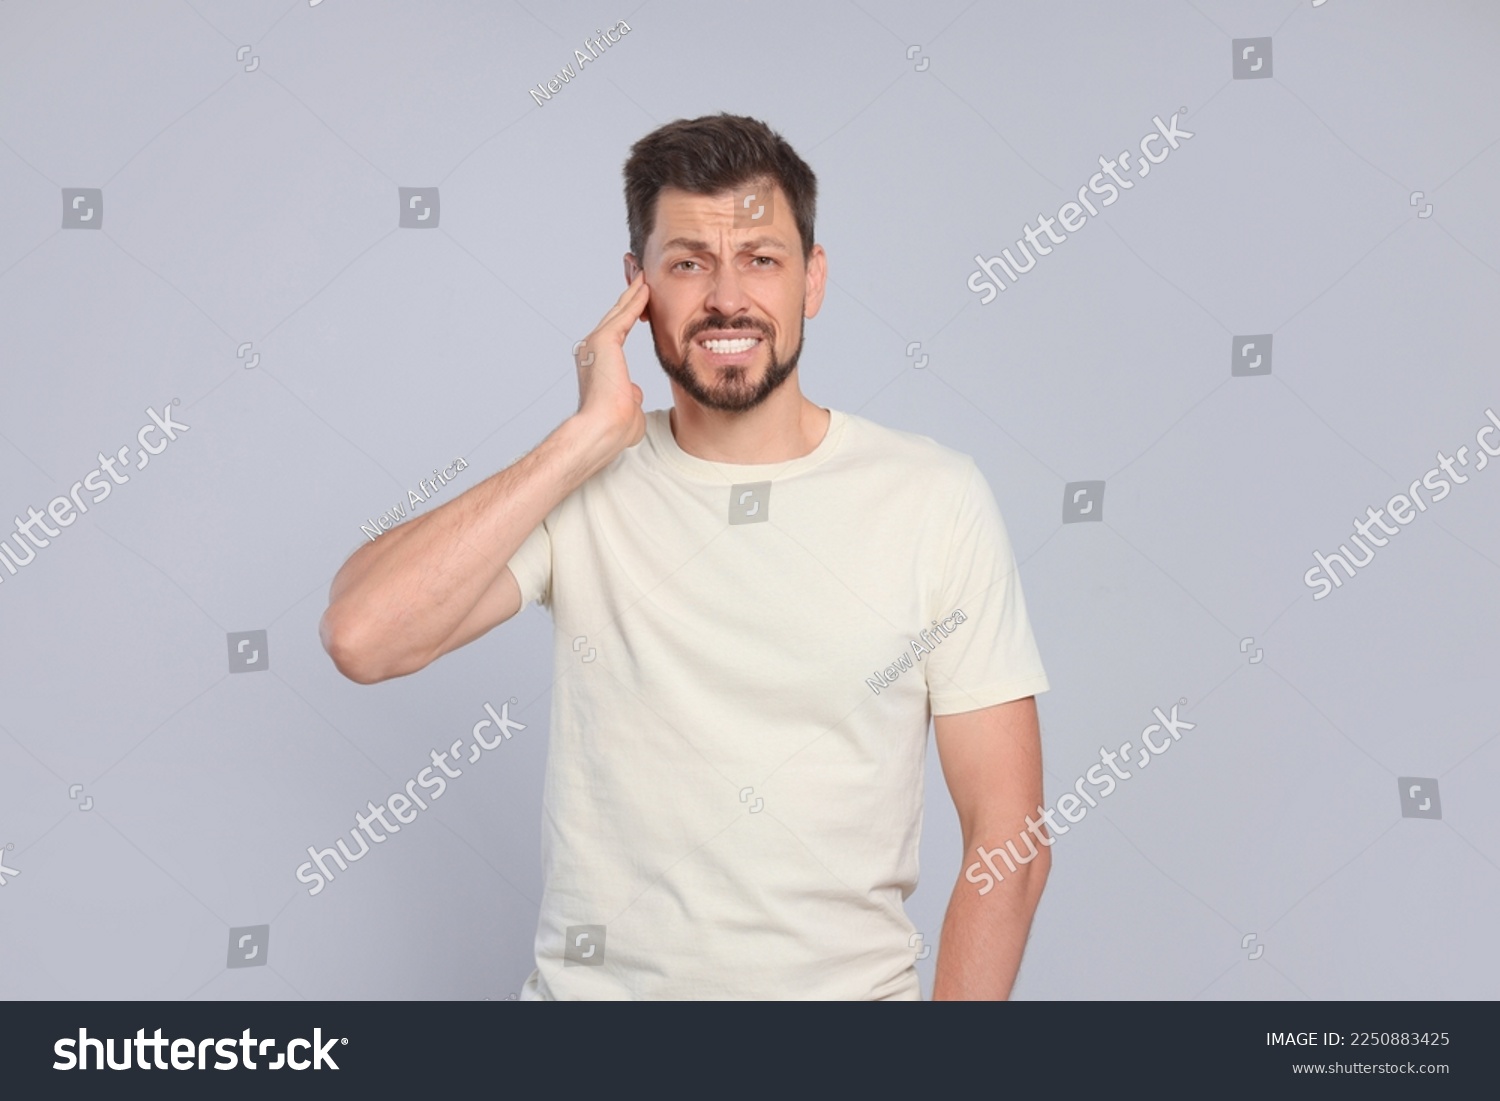 Man suffering from ear pain on grey background #2250883425